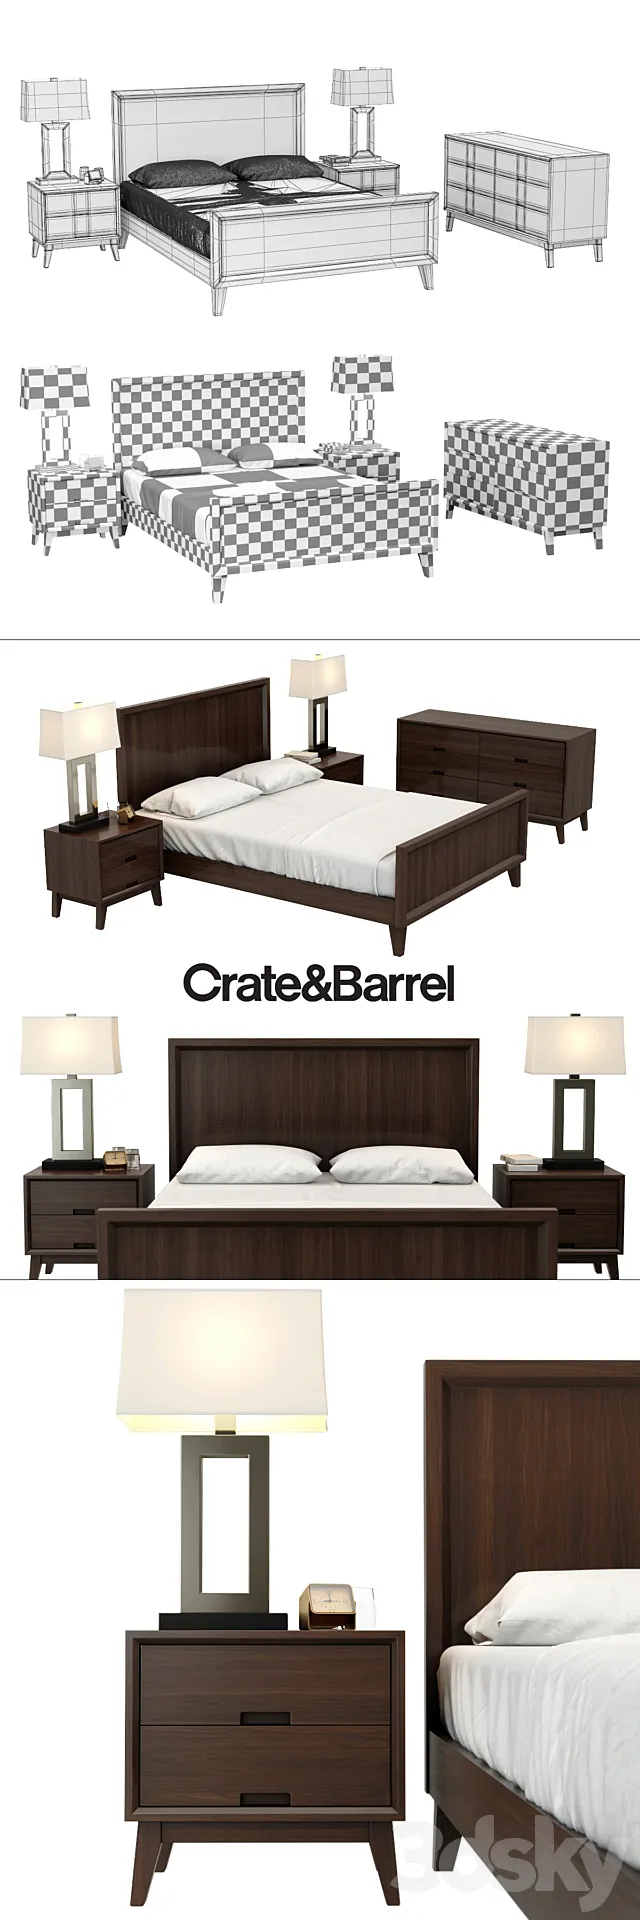 Crate & Barrel _ STEPPE COLLECTION 3DSMax File